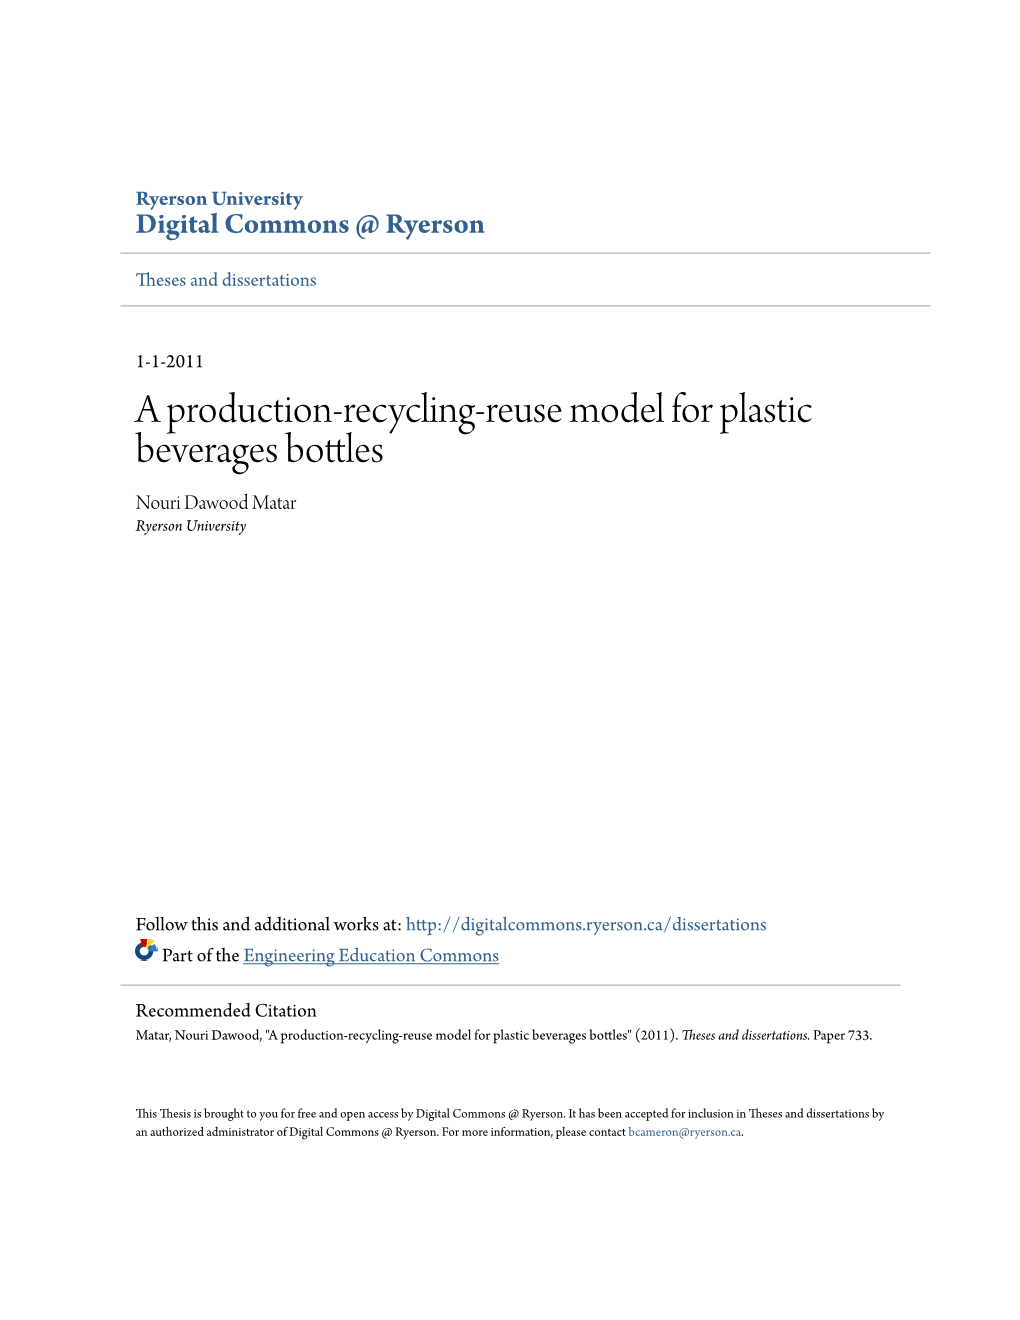 A Production-Recycling-Reuse Model for Plastic Beverages Bottles Nouri Dawood Matar Ryerson University